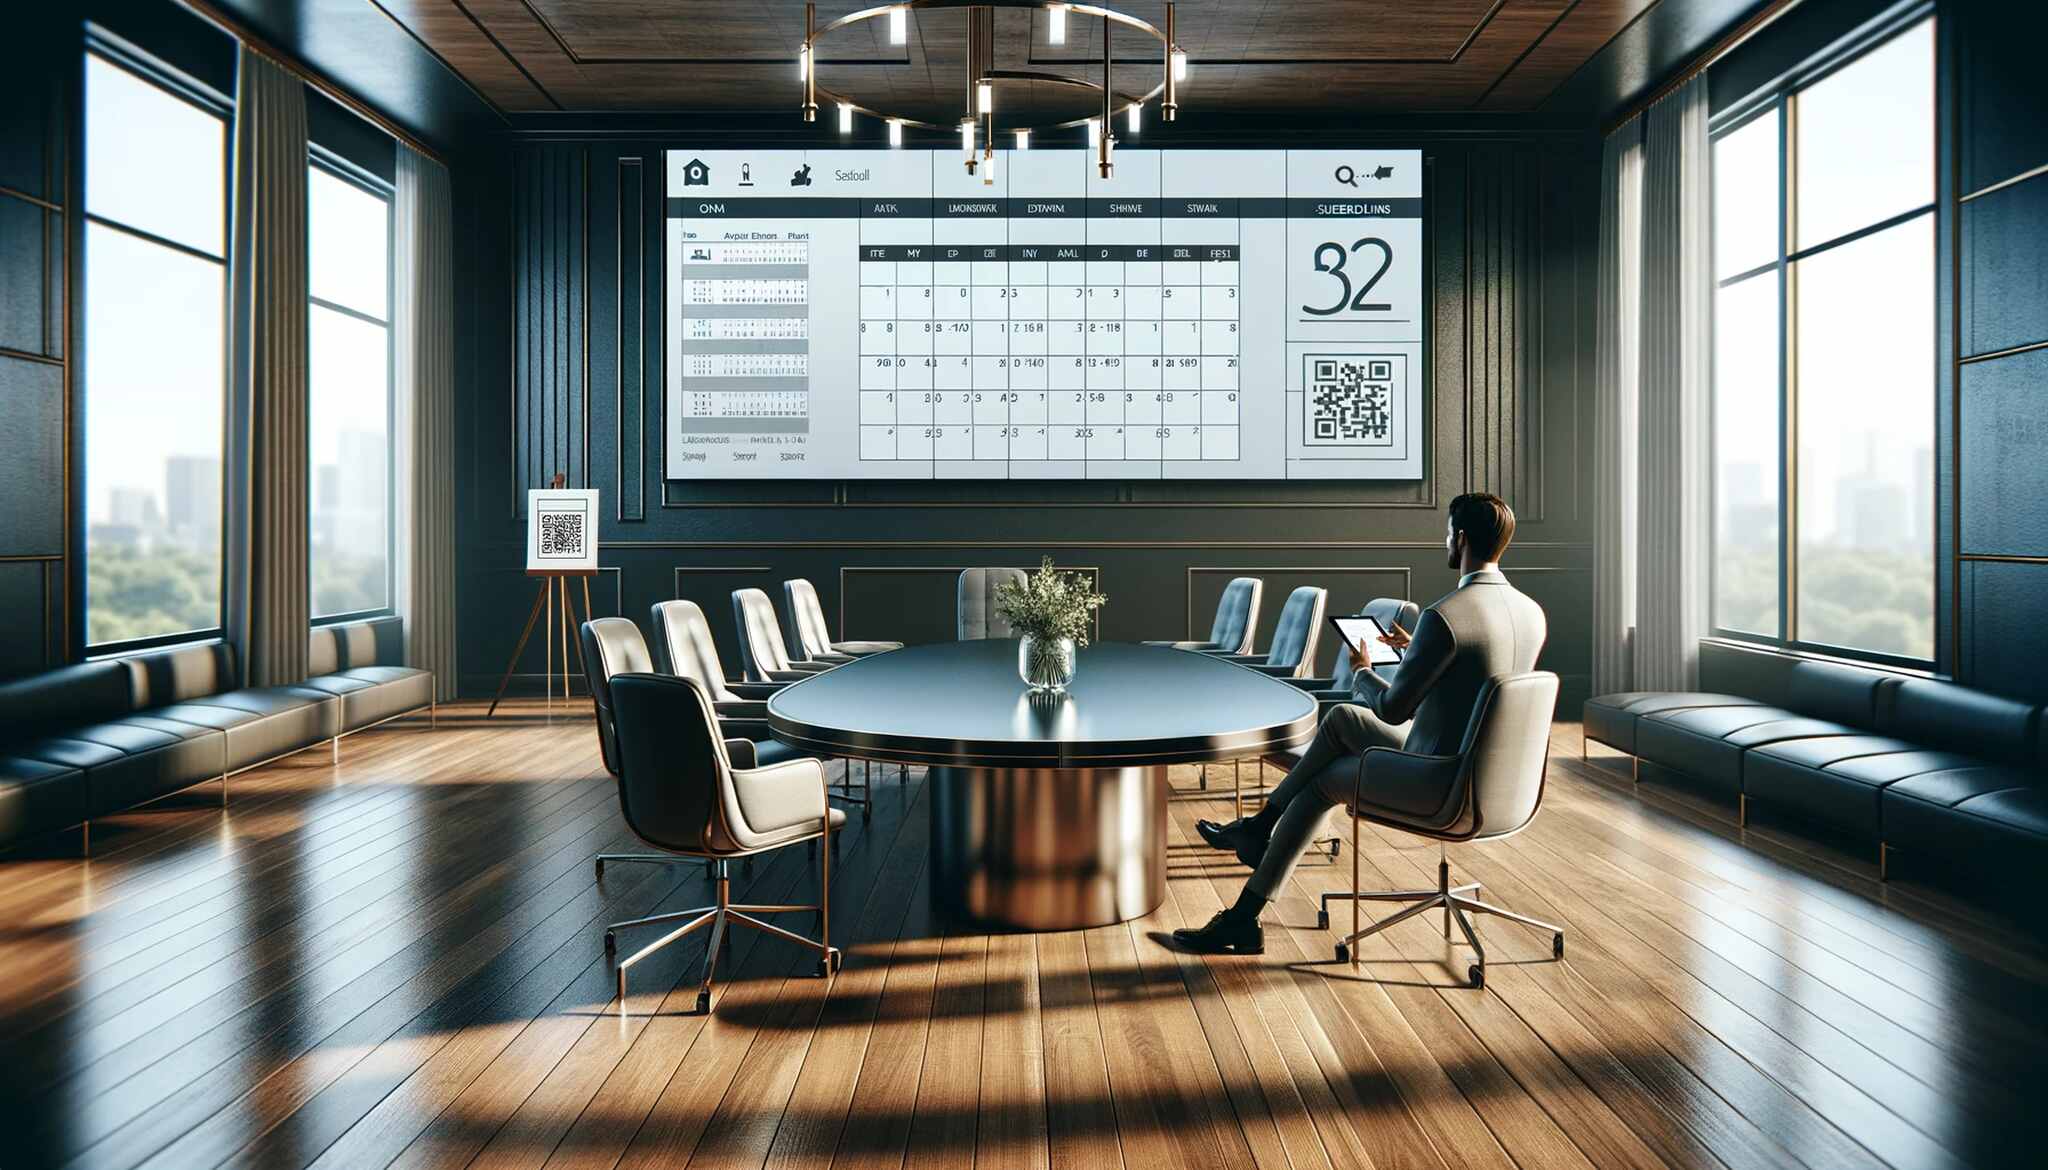 A man in a meeting room with a calendar on the wall and a QR code